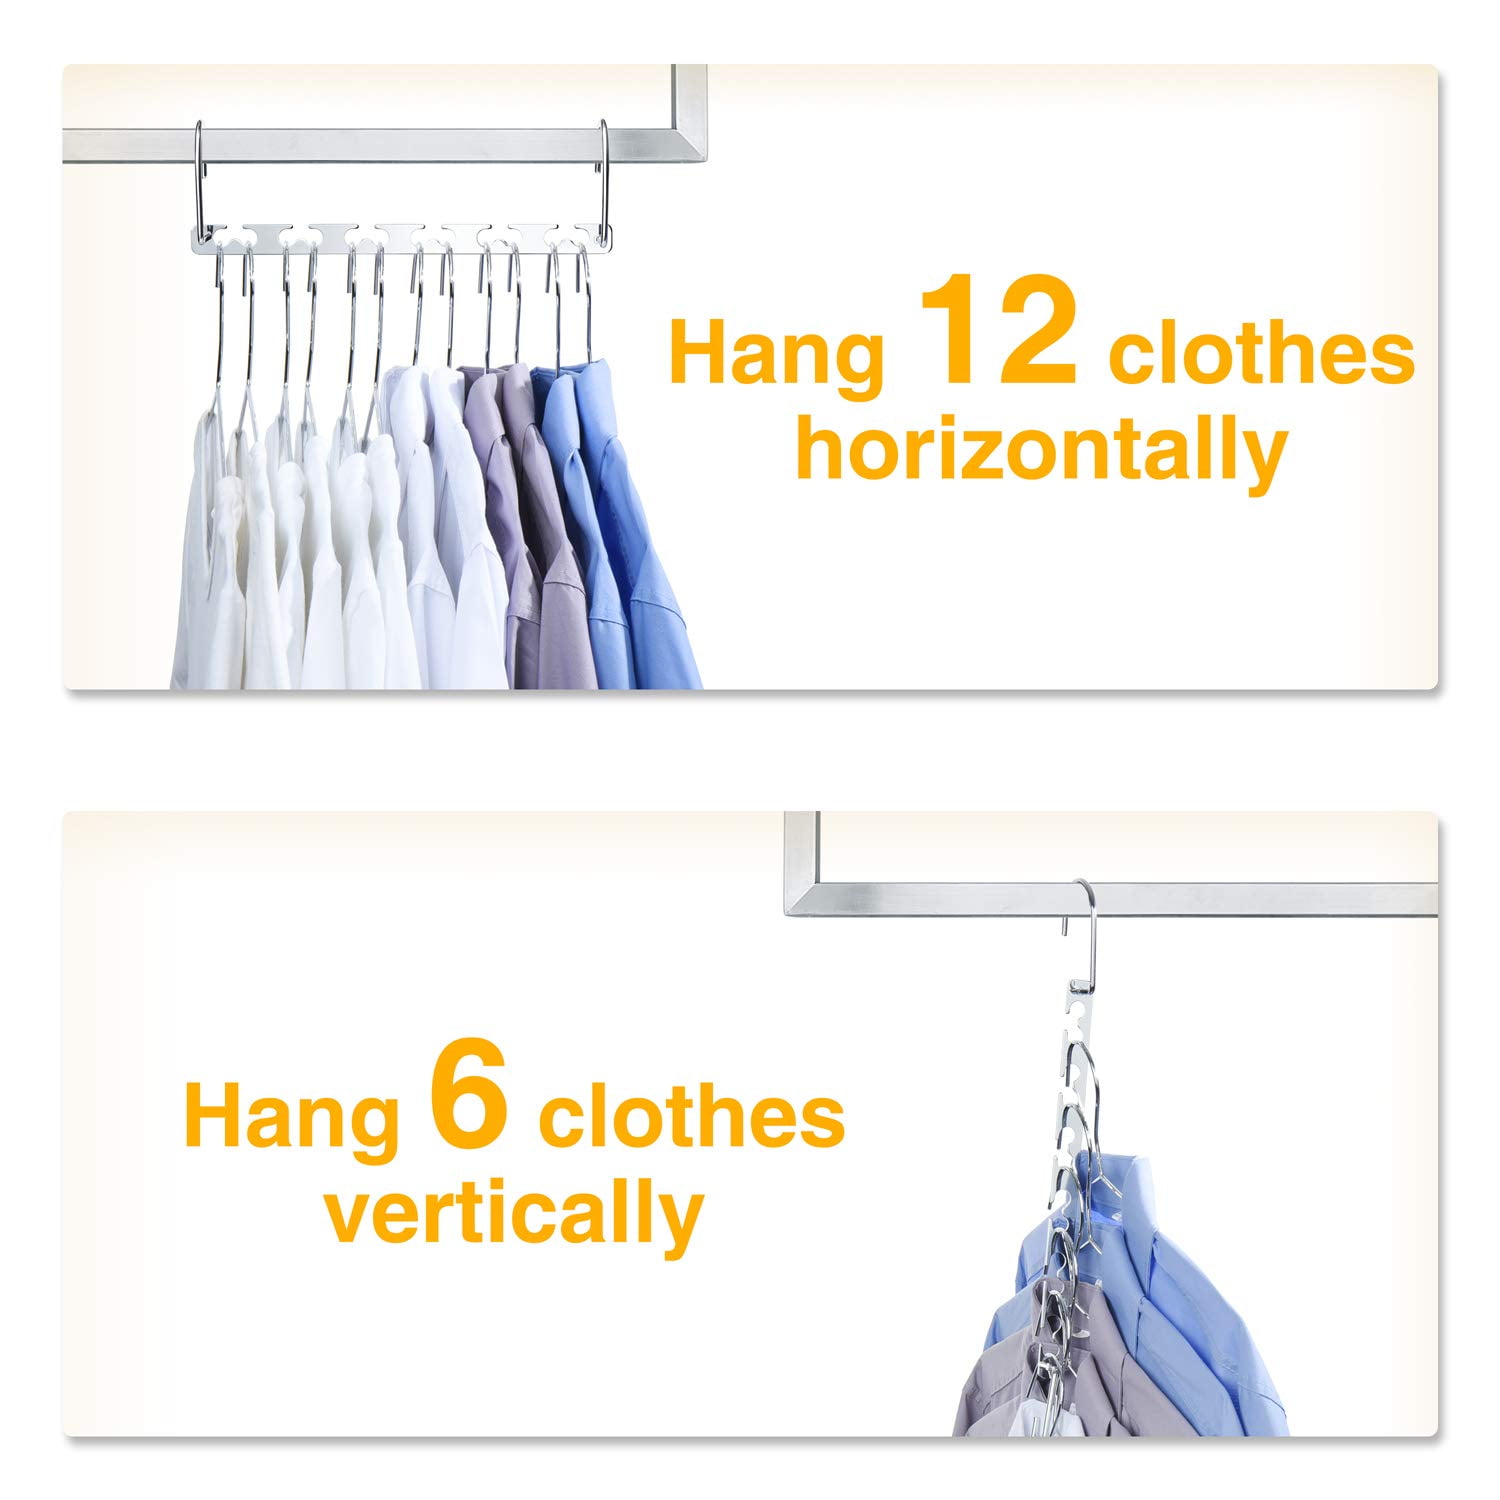 Space Saving Hangers – House Day